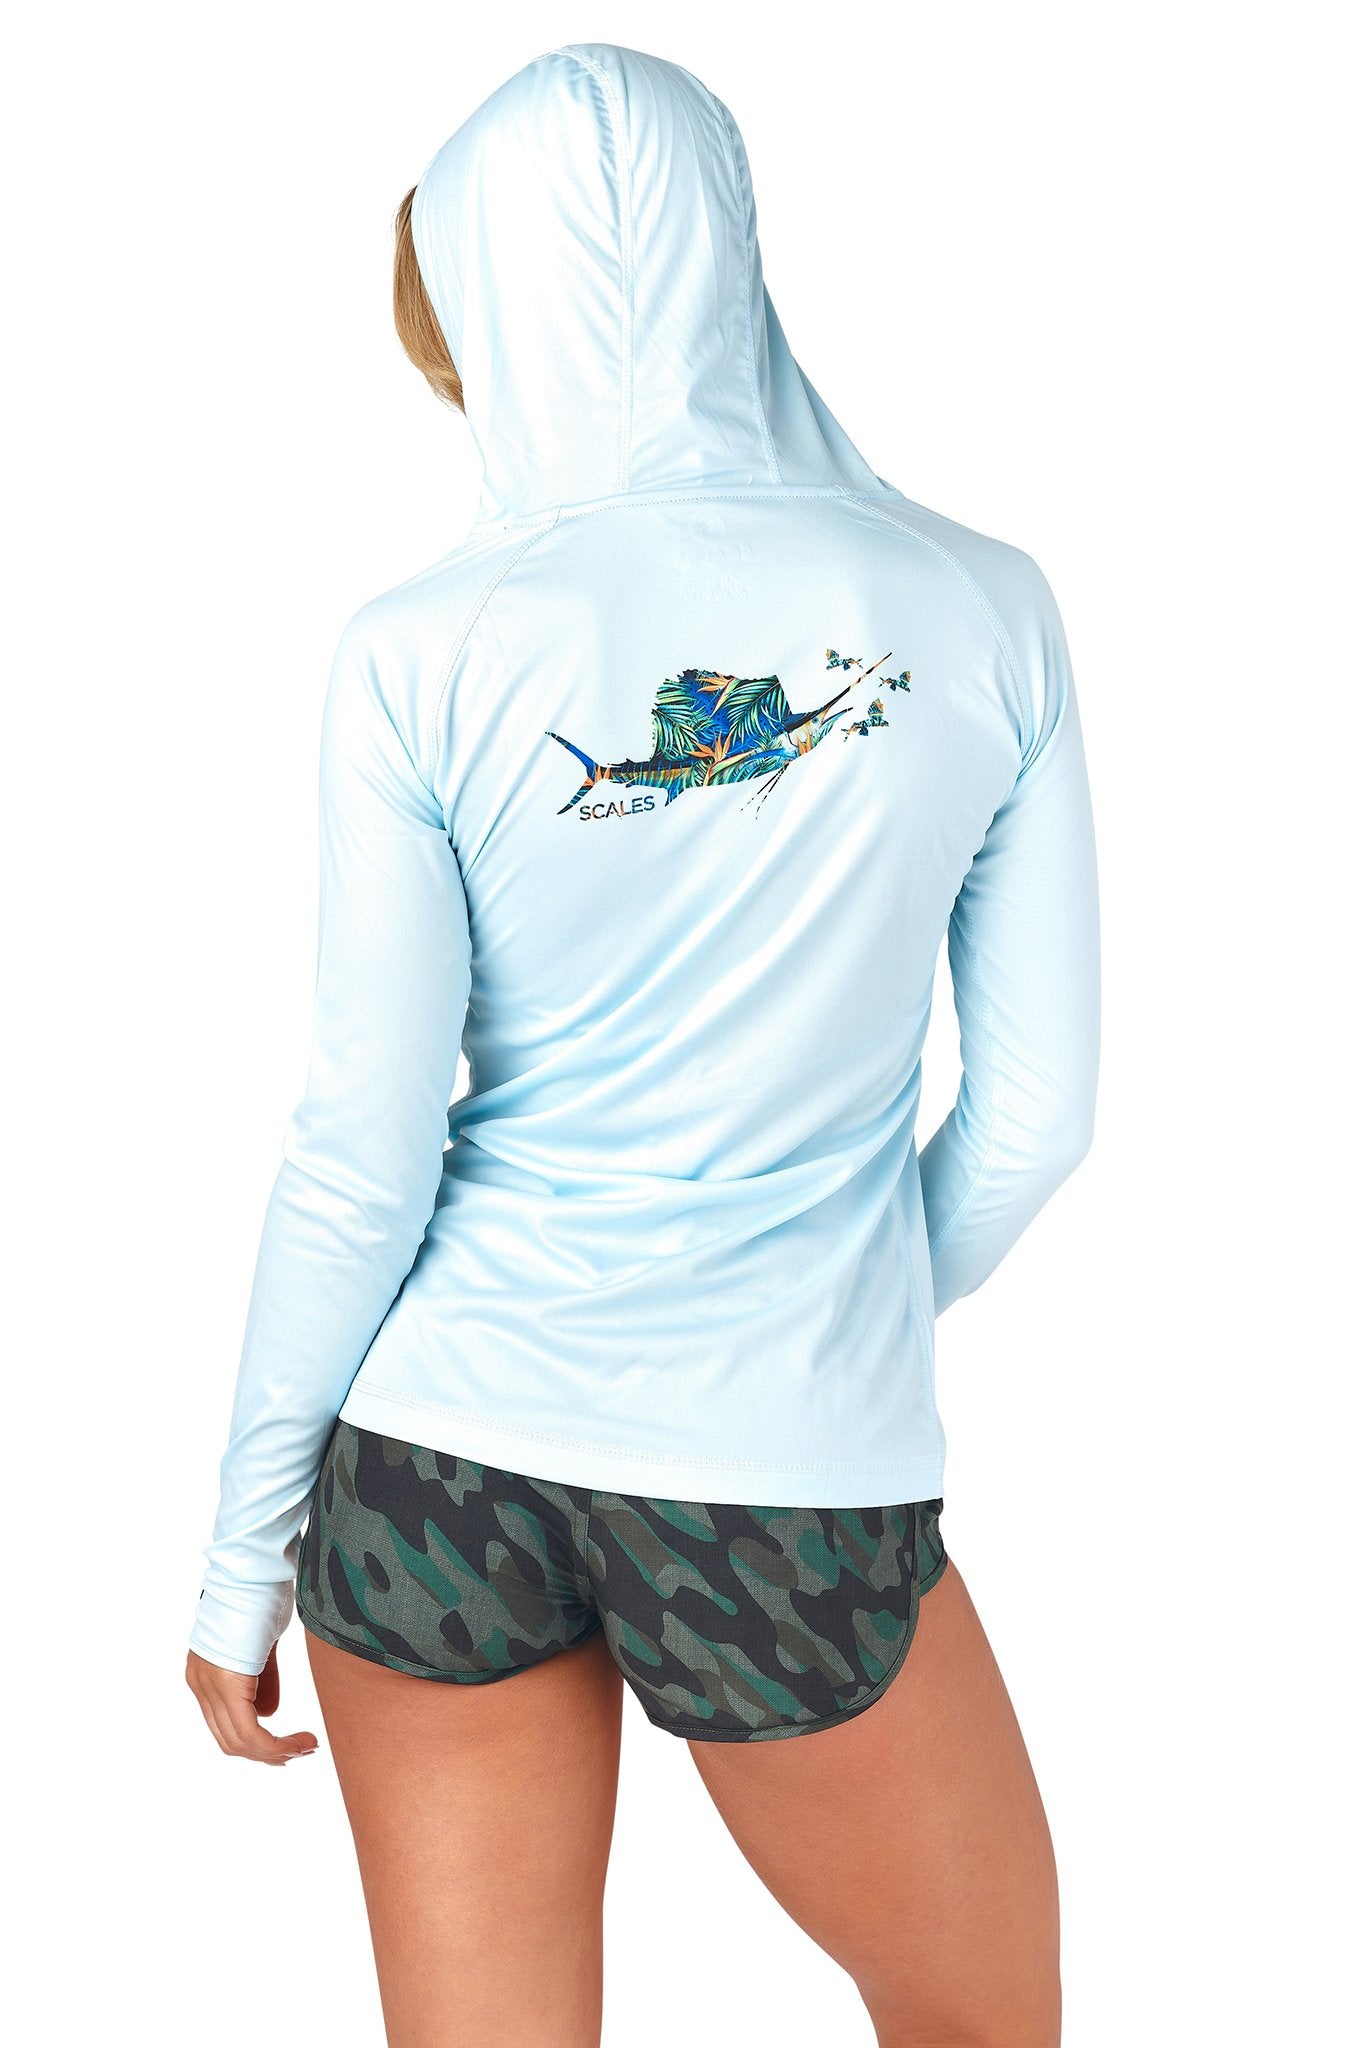 Fly Sail Pro Performance Hoodie